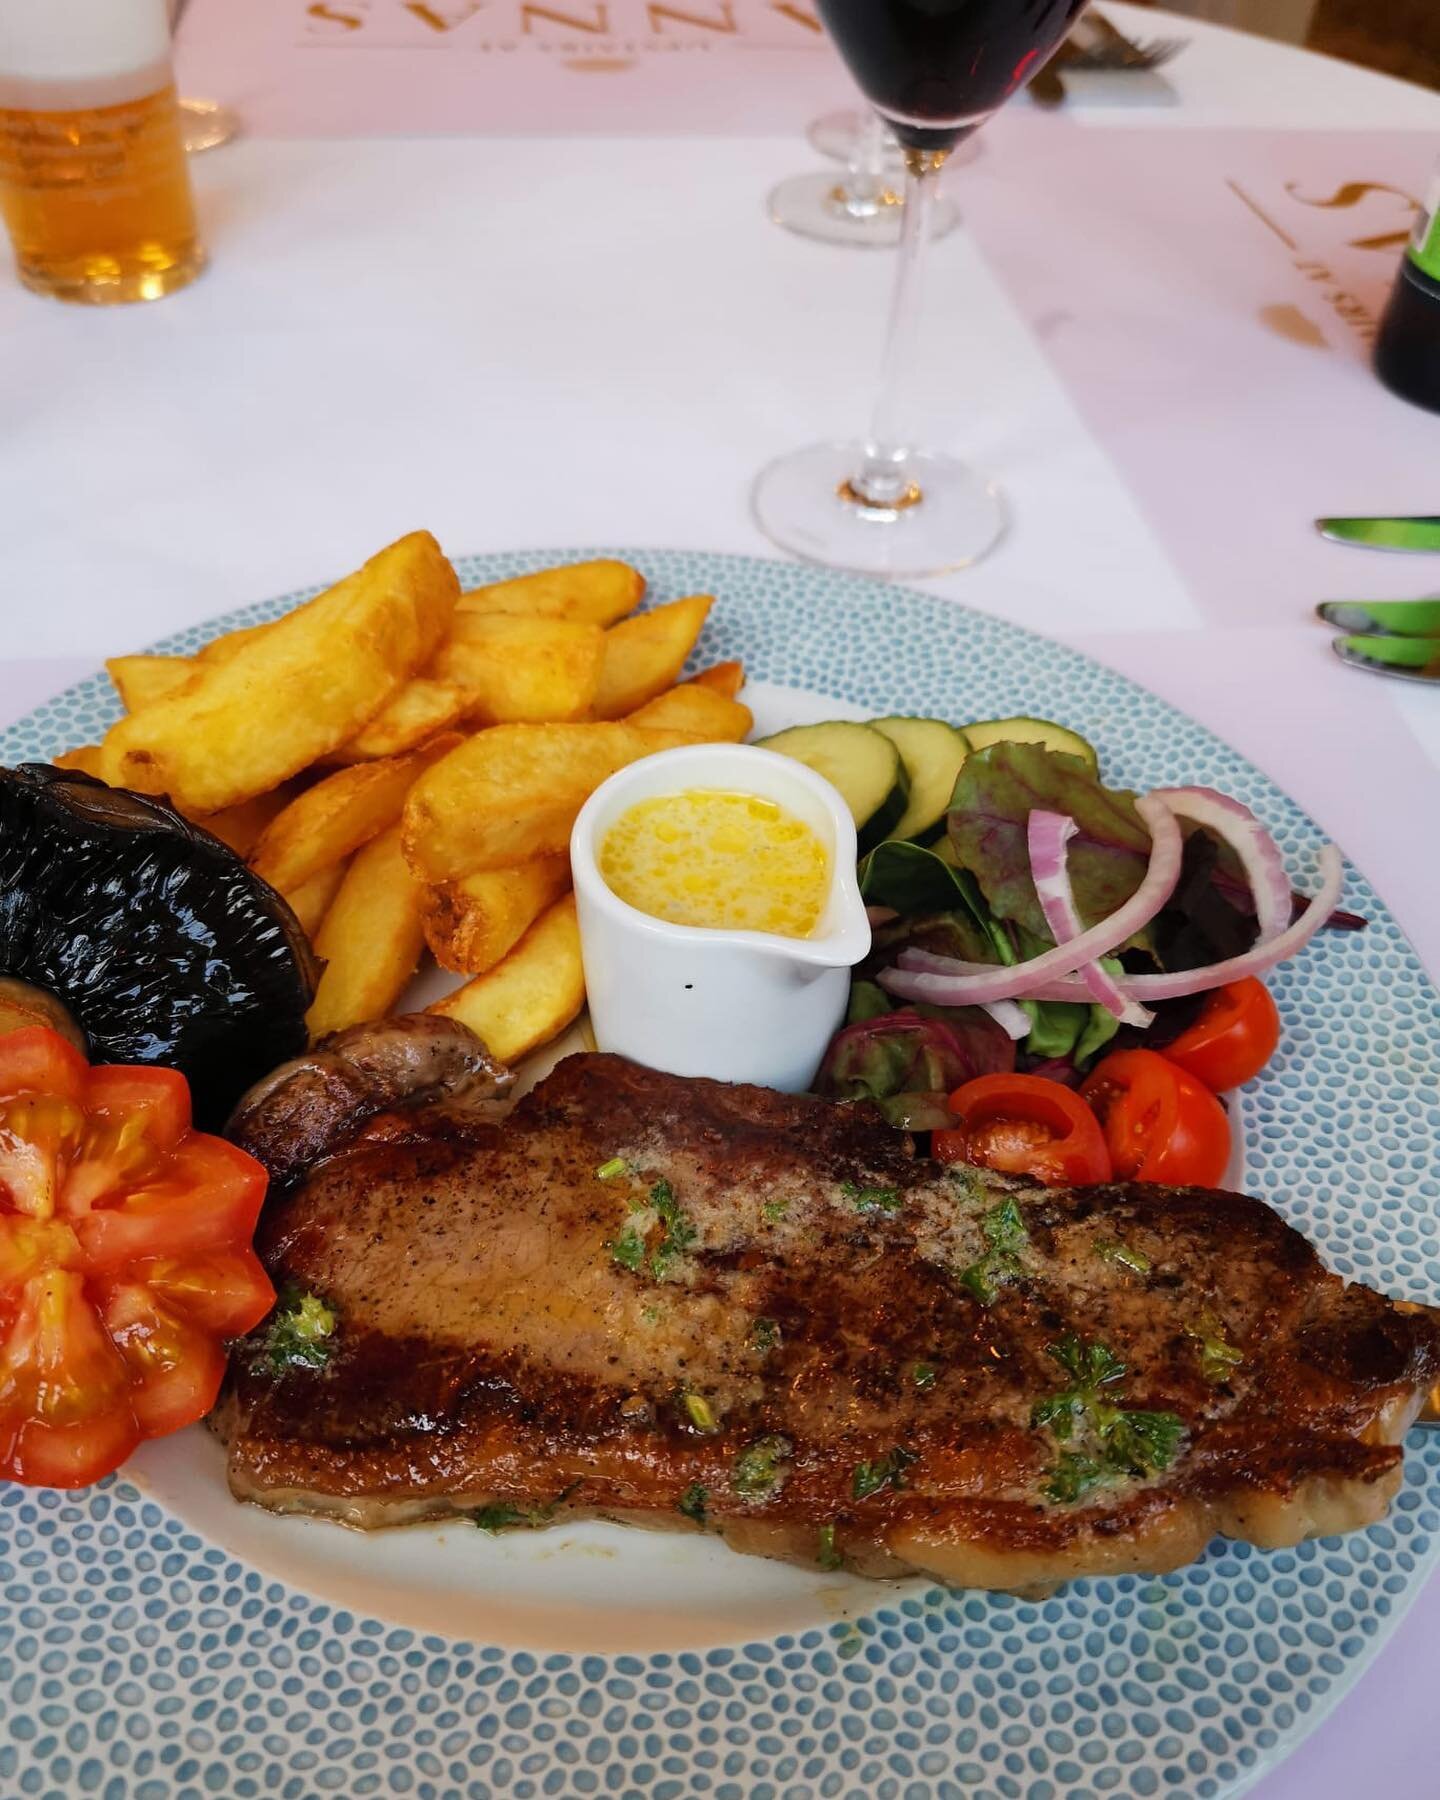 Last minute lunch ideas we are serving this 8oz sirloin steak for &pound;19.90. Treat Dad to this delicious lunch @upstairs.at.annas 

#fathersday #steak #lunchmenu #treat #upstairsatannas #conwy #conwycastle #northwales #wales